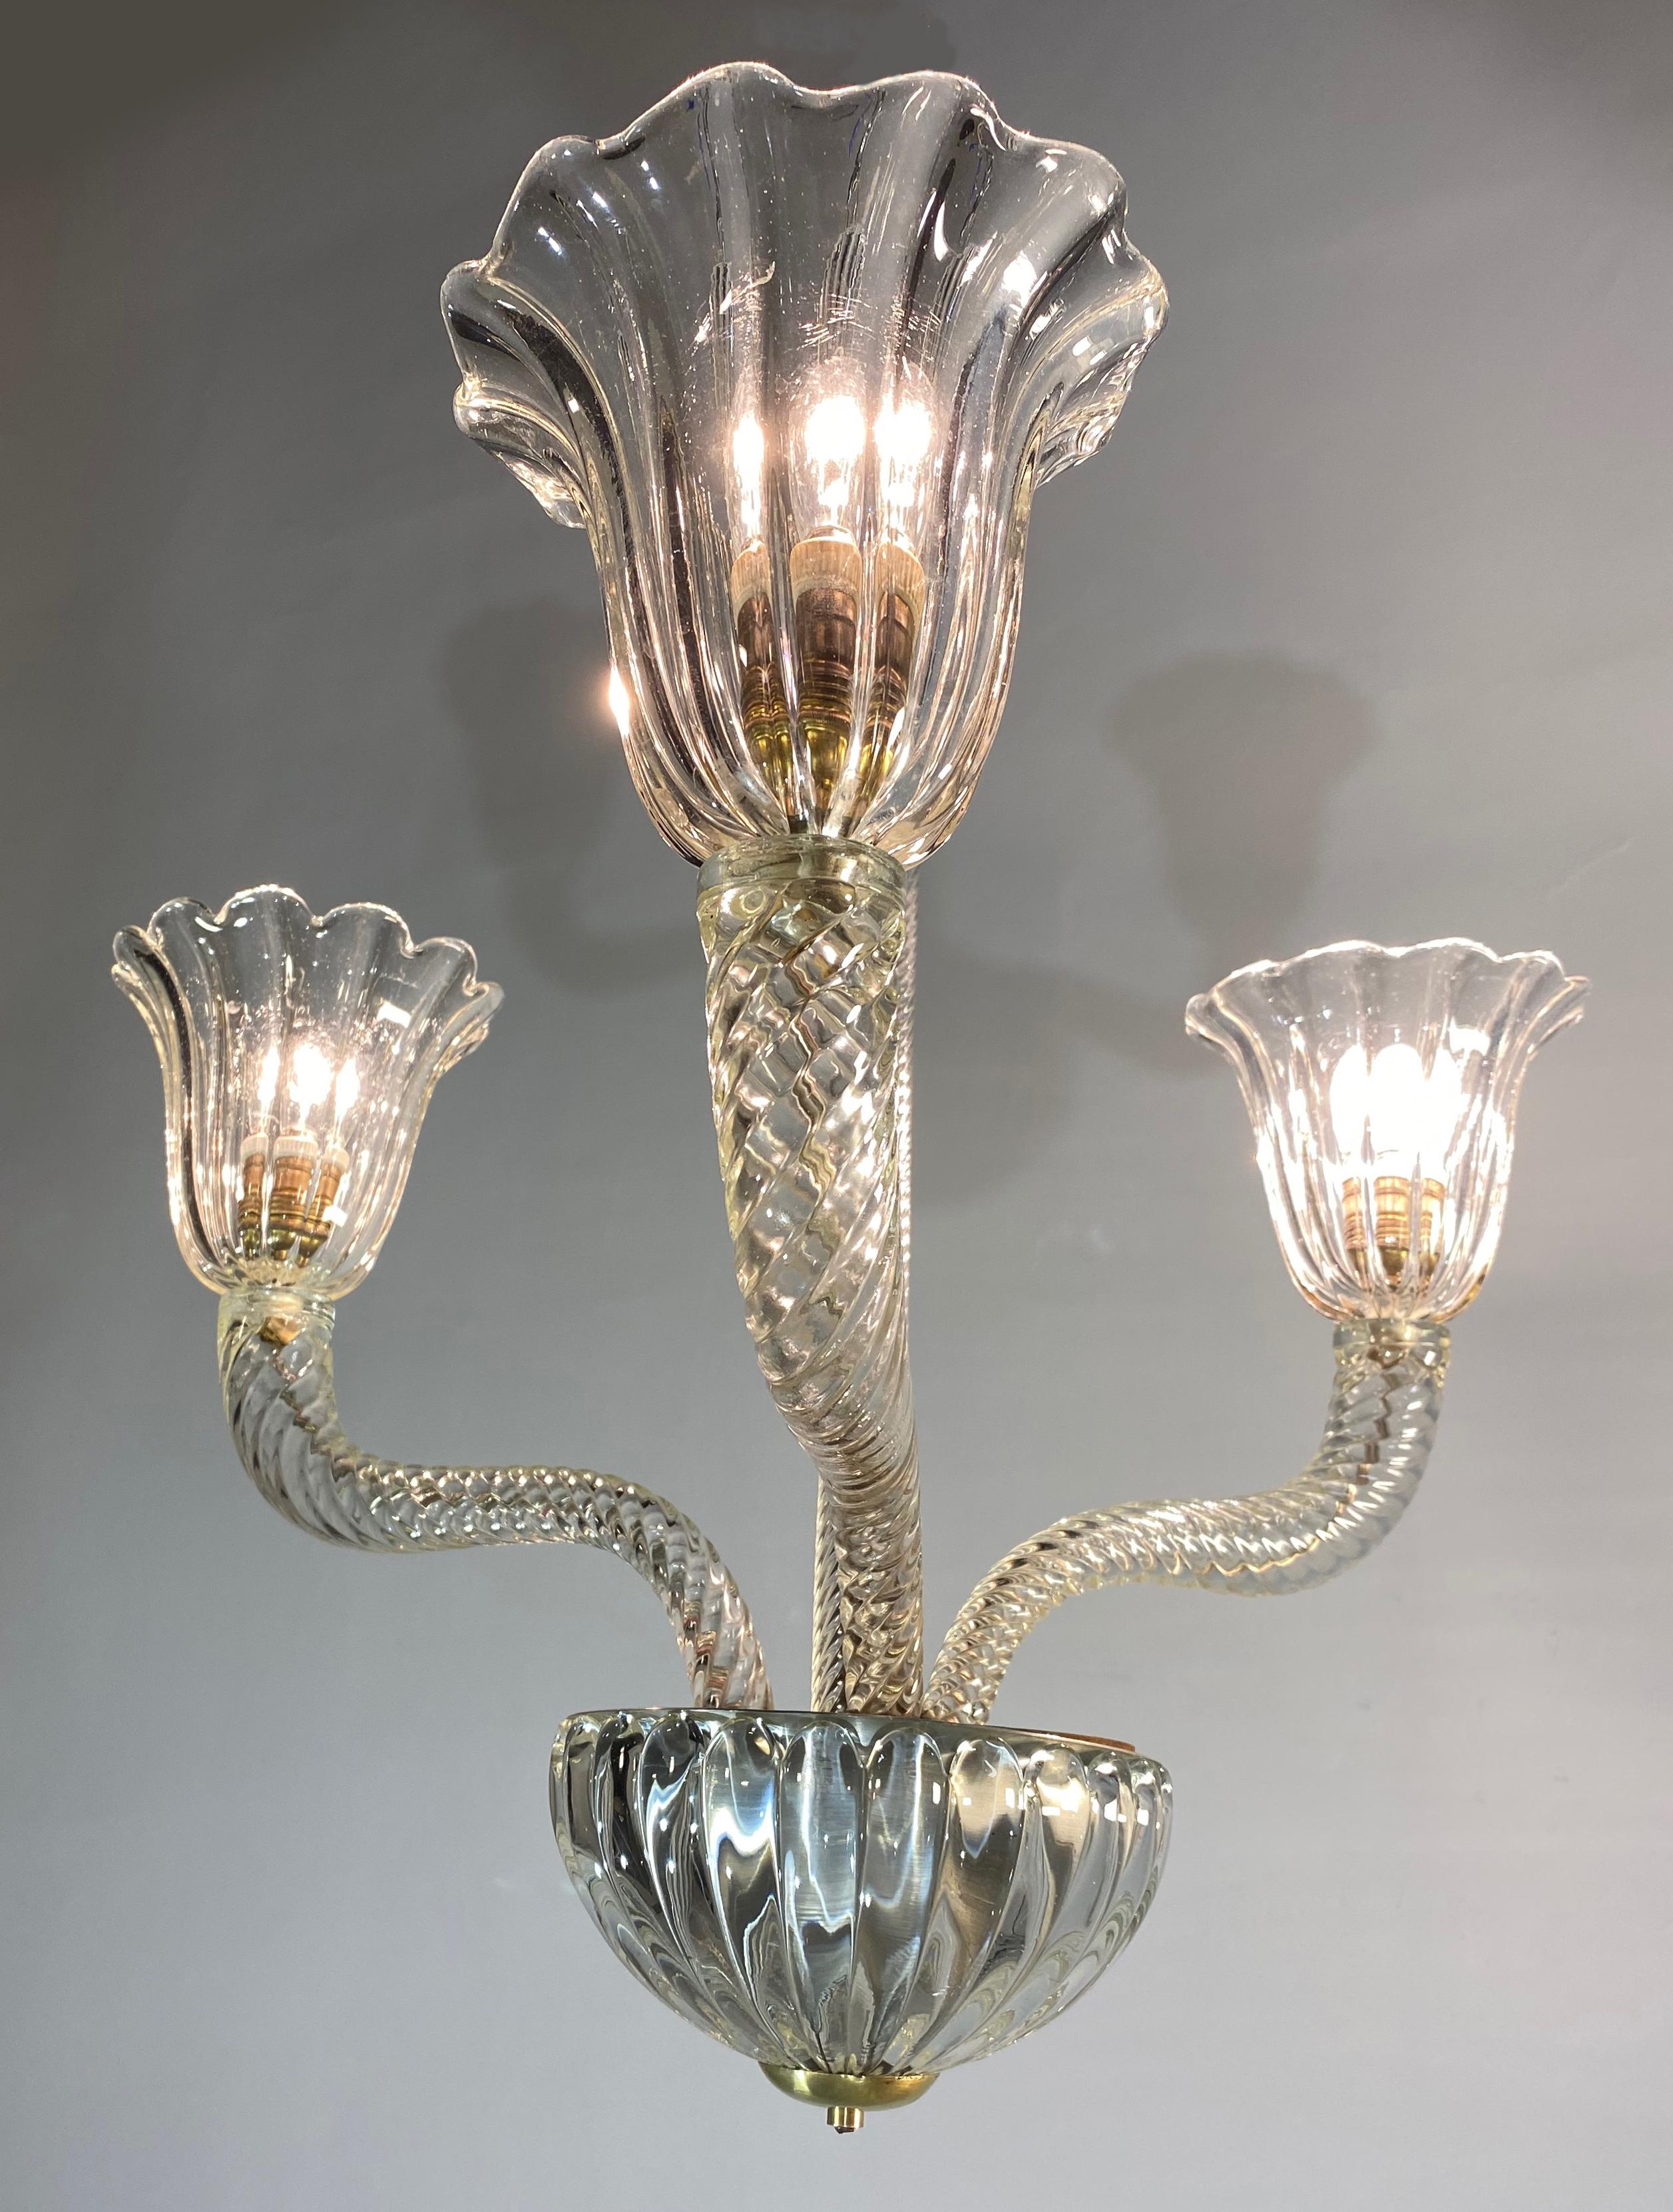 Art Deco chandelier by Ercole Barovier, 1940s. 
From Private collection.